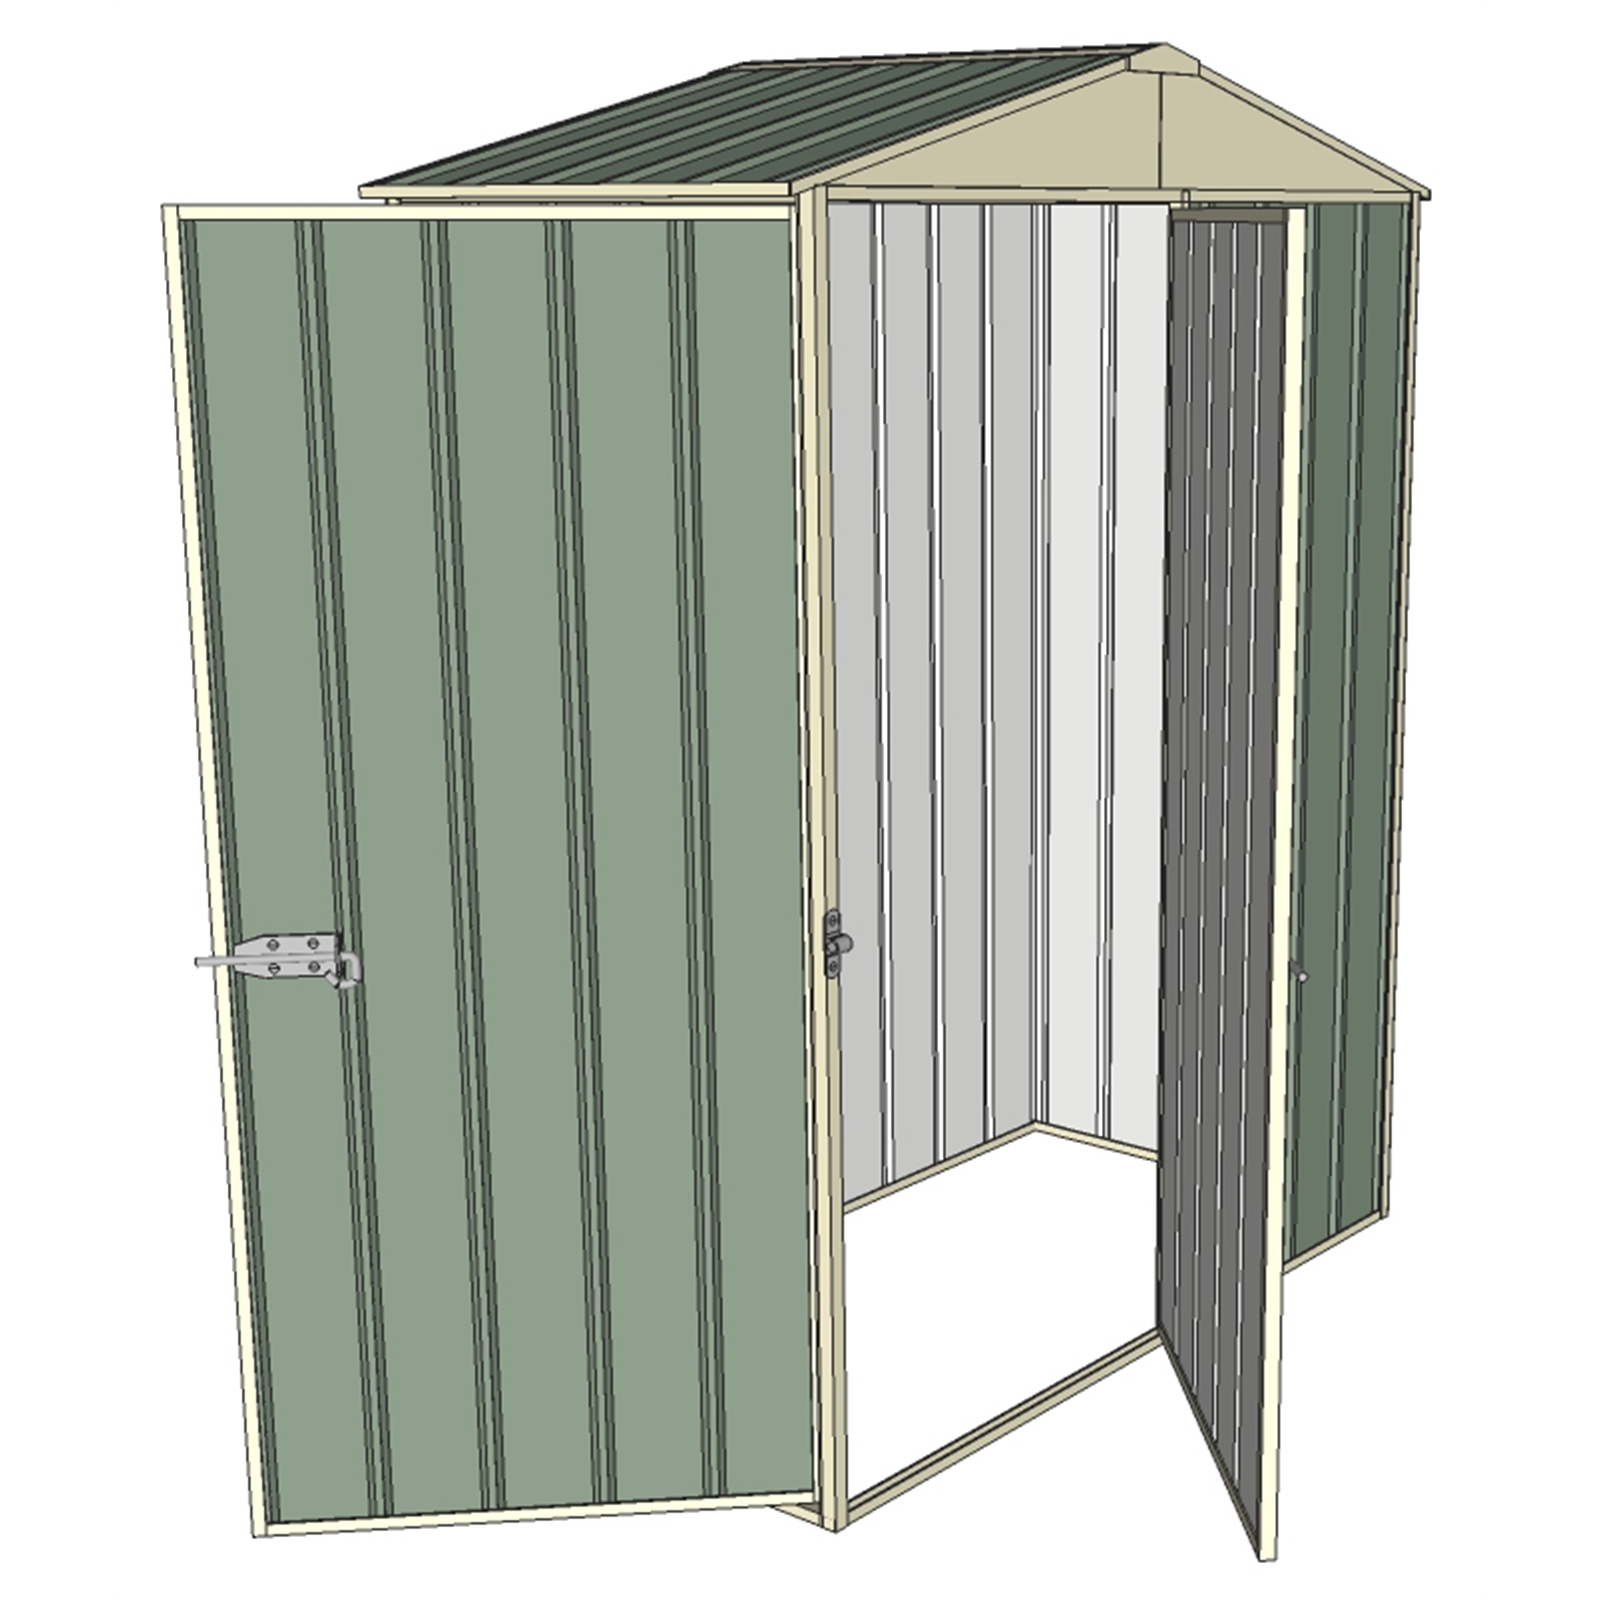 Build-a-Shed 1.5 x 2.3 x 0.8m Green Front Gable Two Single Hinged Doors Shed